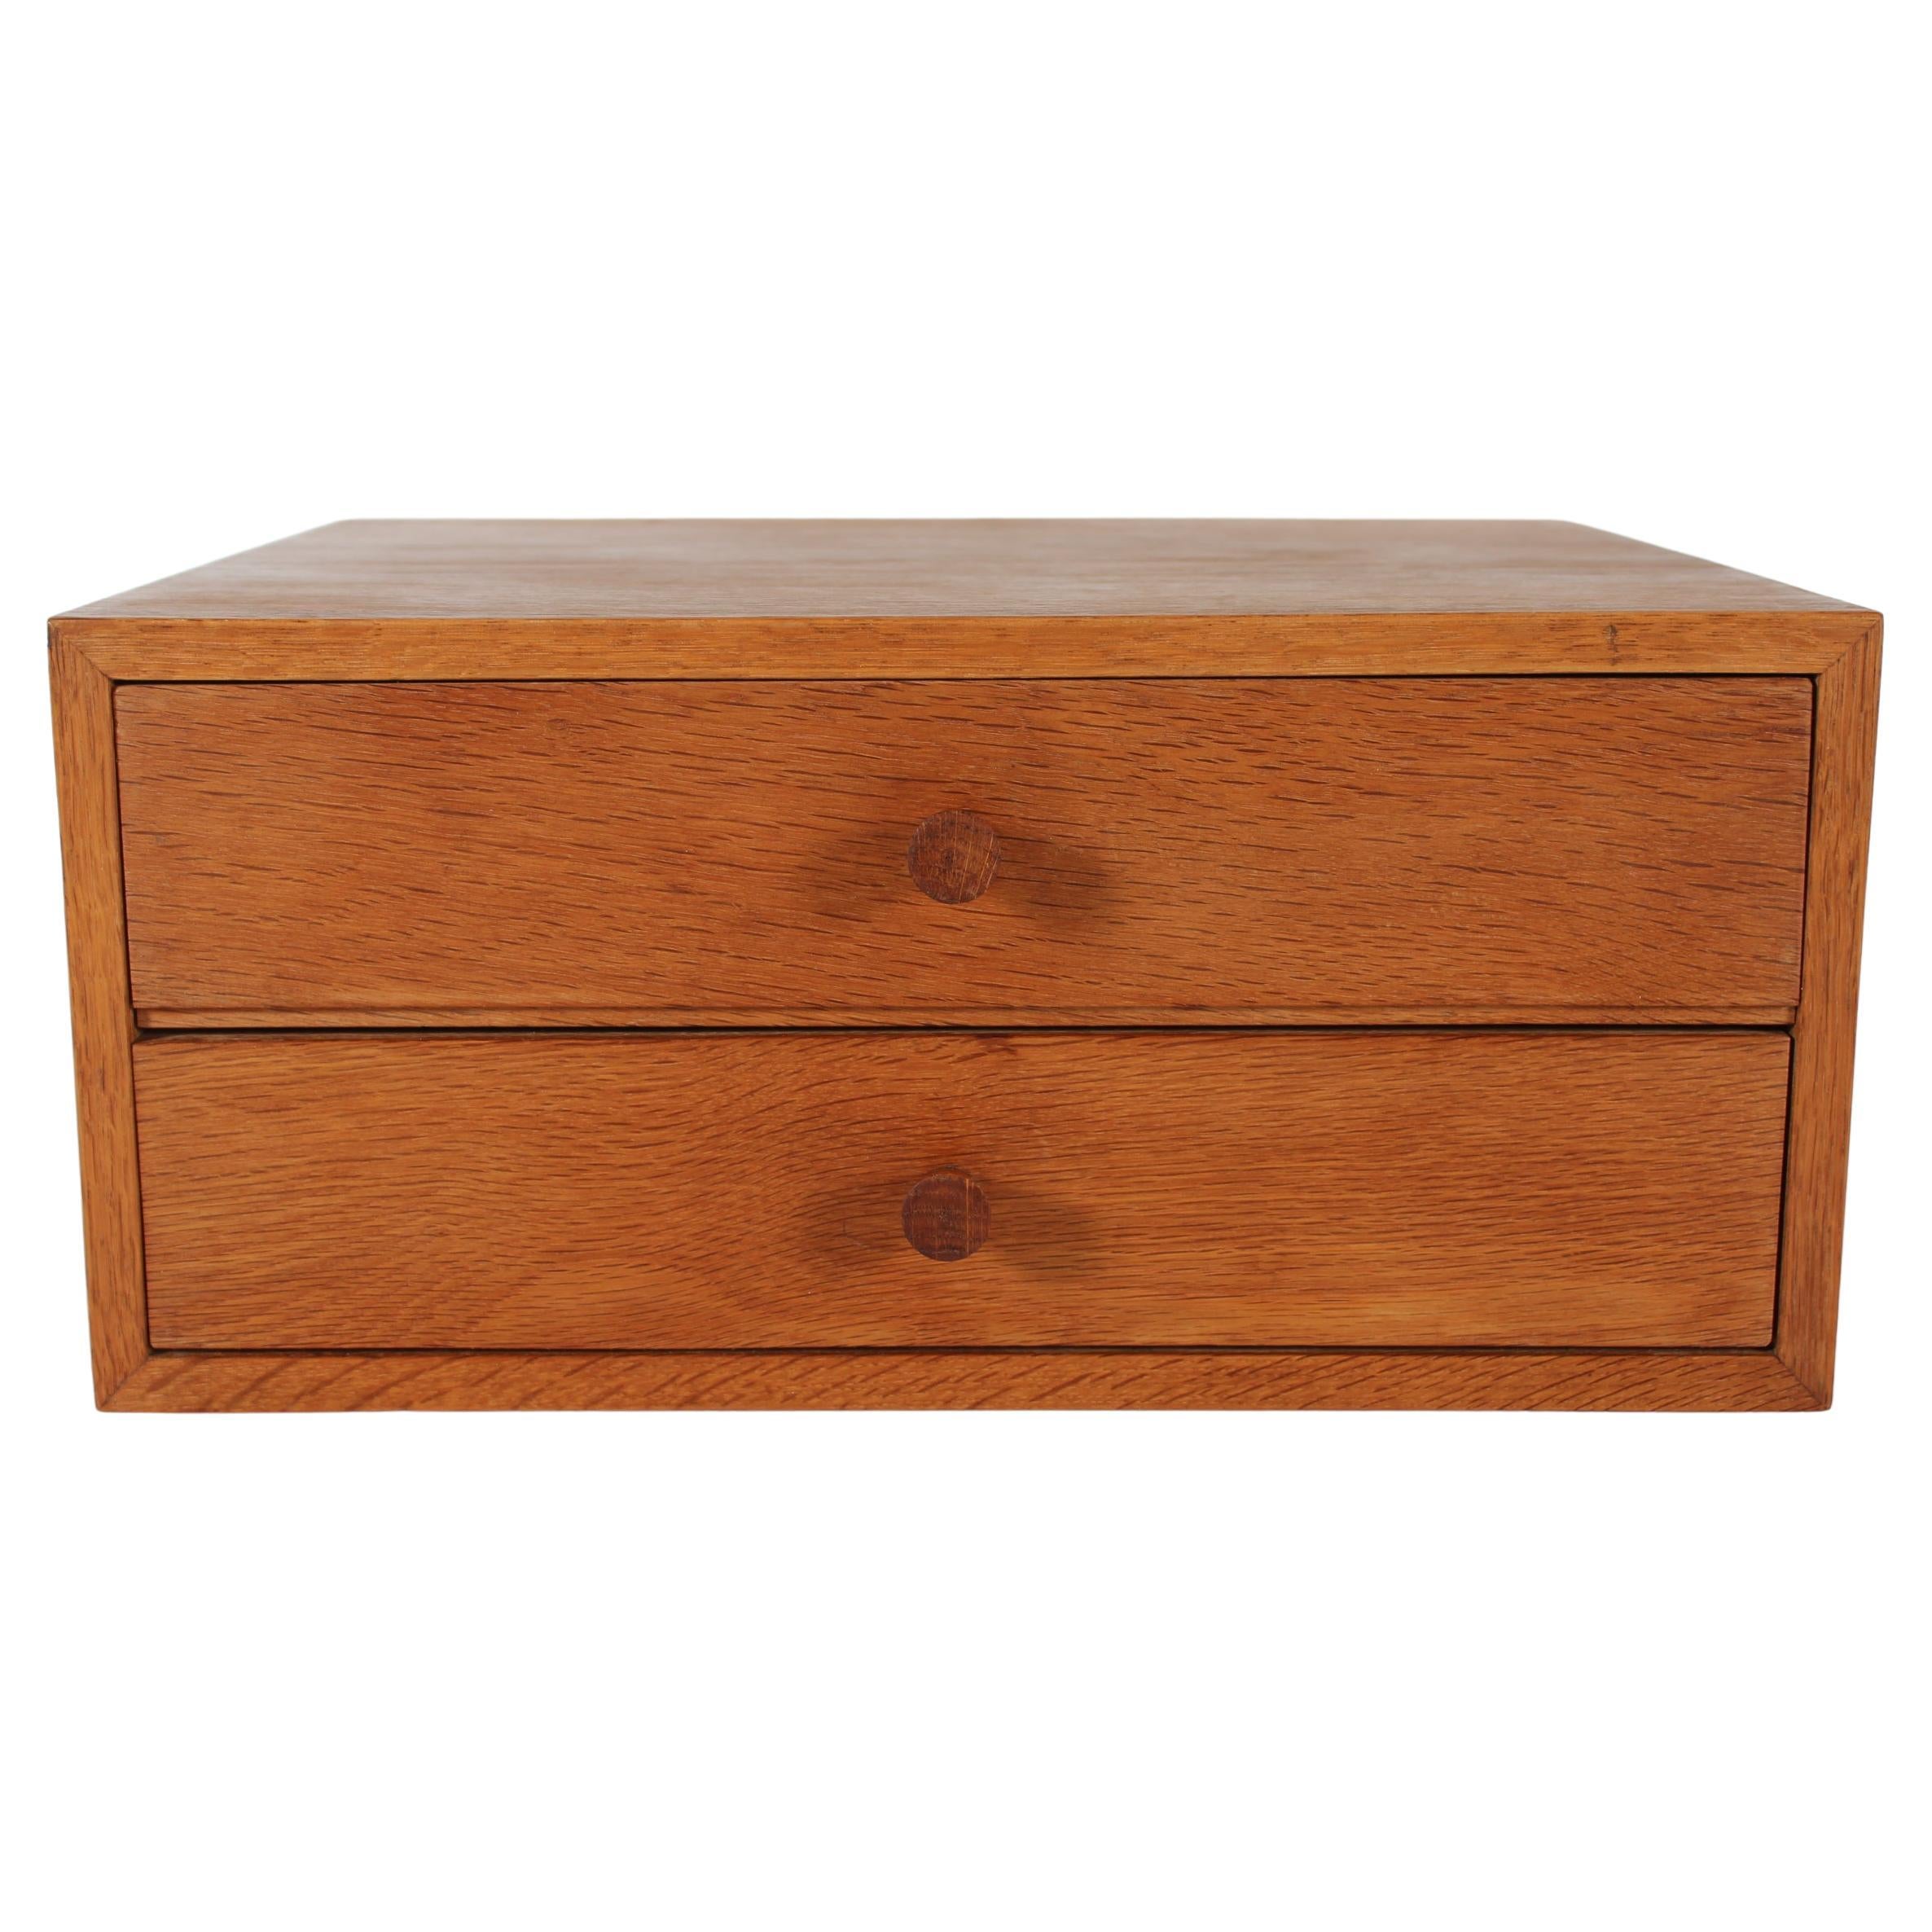 Danish Small Chest of Drawers File Cabinet Made from Oak Midcentury Modern 1960s For Sale